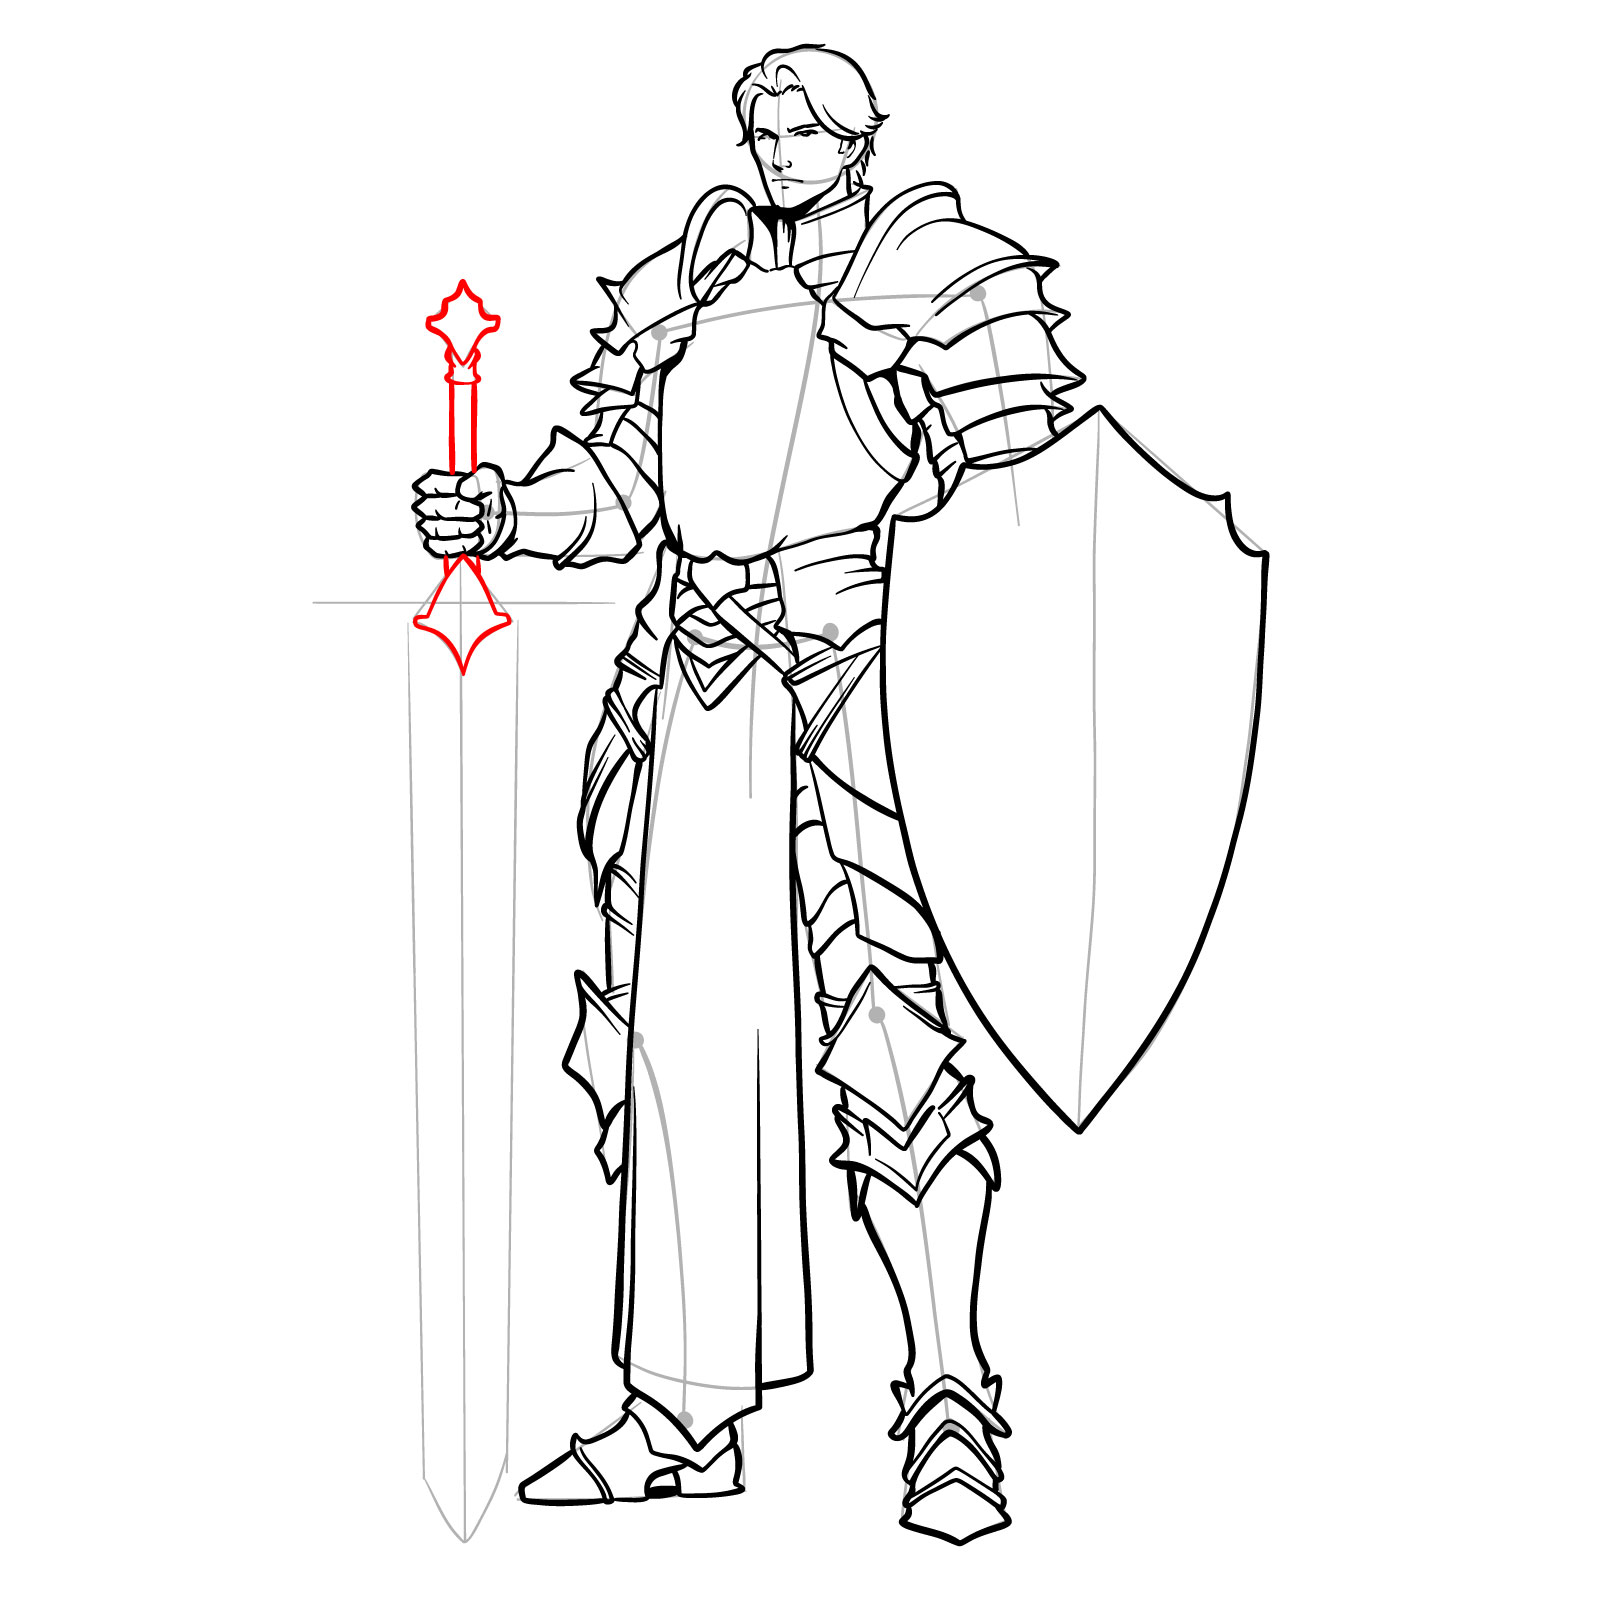 Drawing the handle of the paladin's sword - step 21